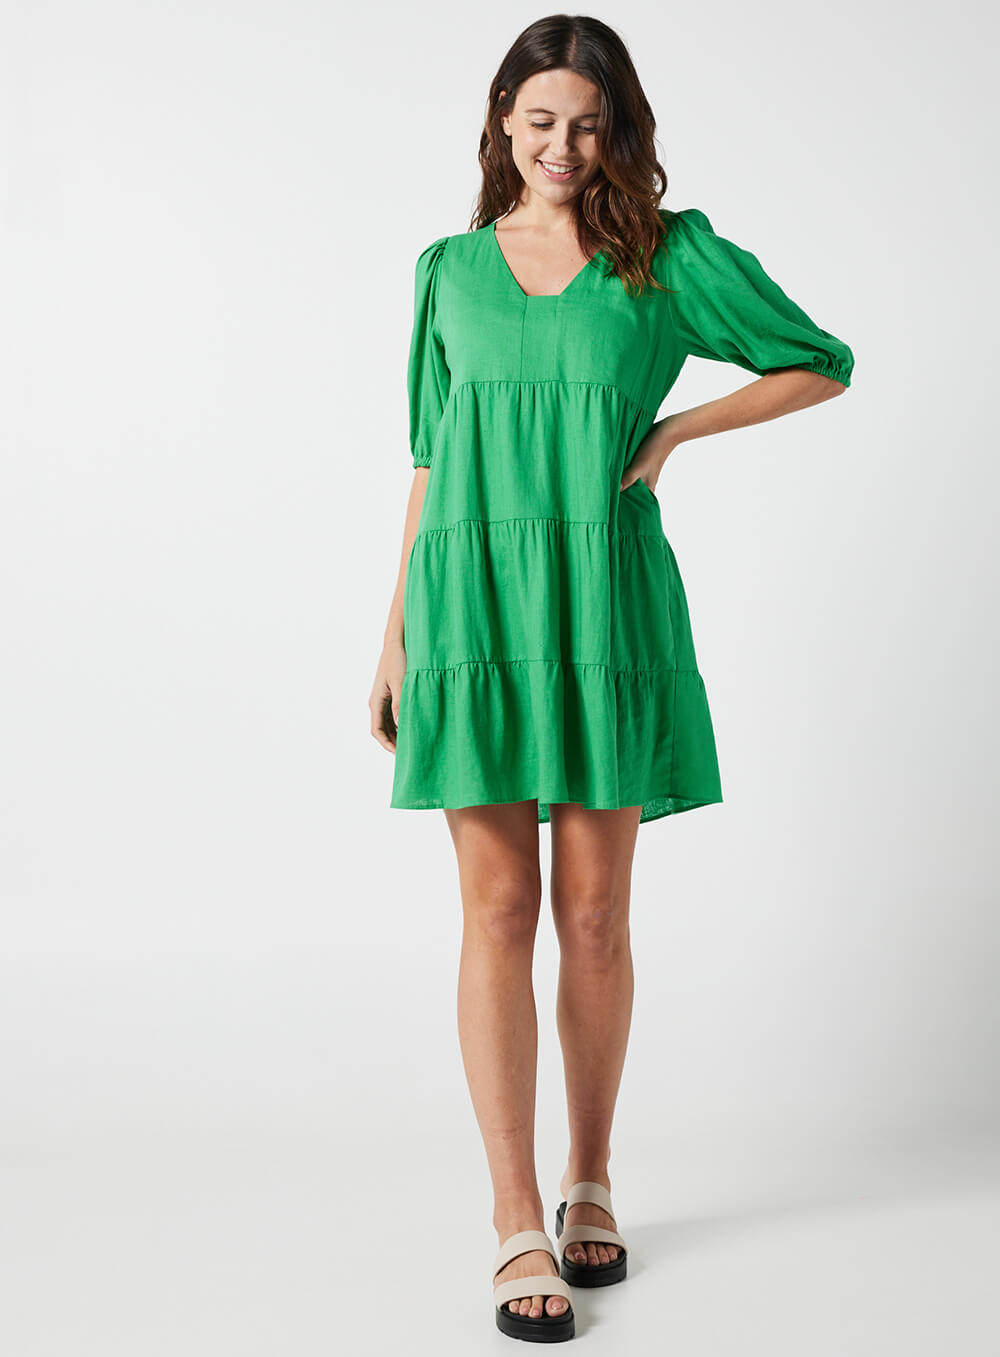 The Eleanor mini dress in green features a flowing layered a line shape with draping linen/viscose fabric, puff 3/4 sleeves with elastic cuff which can be pushed up to the elbow, a dropped v shape neckline with a square finish.